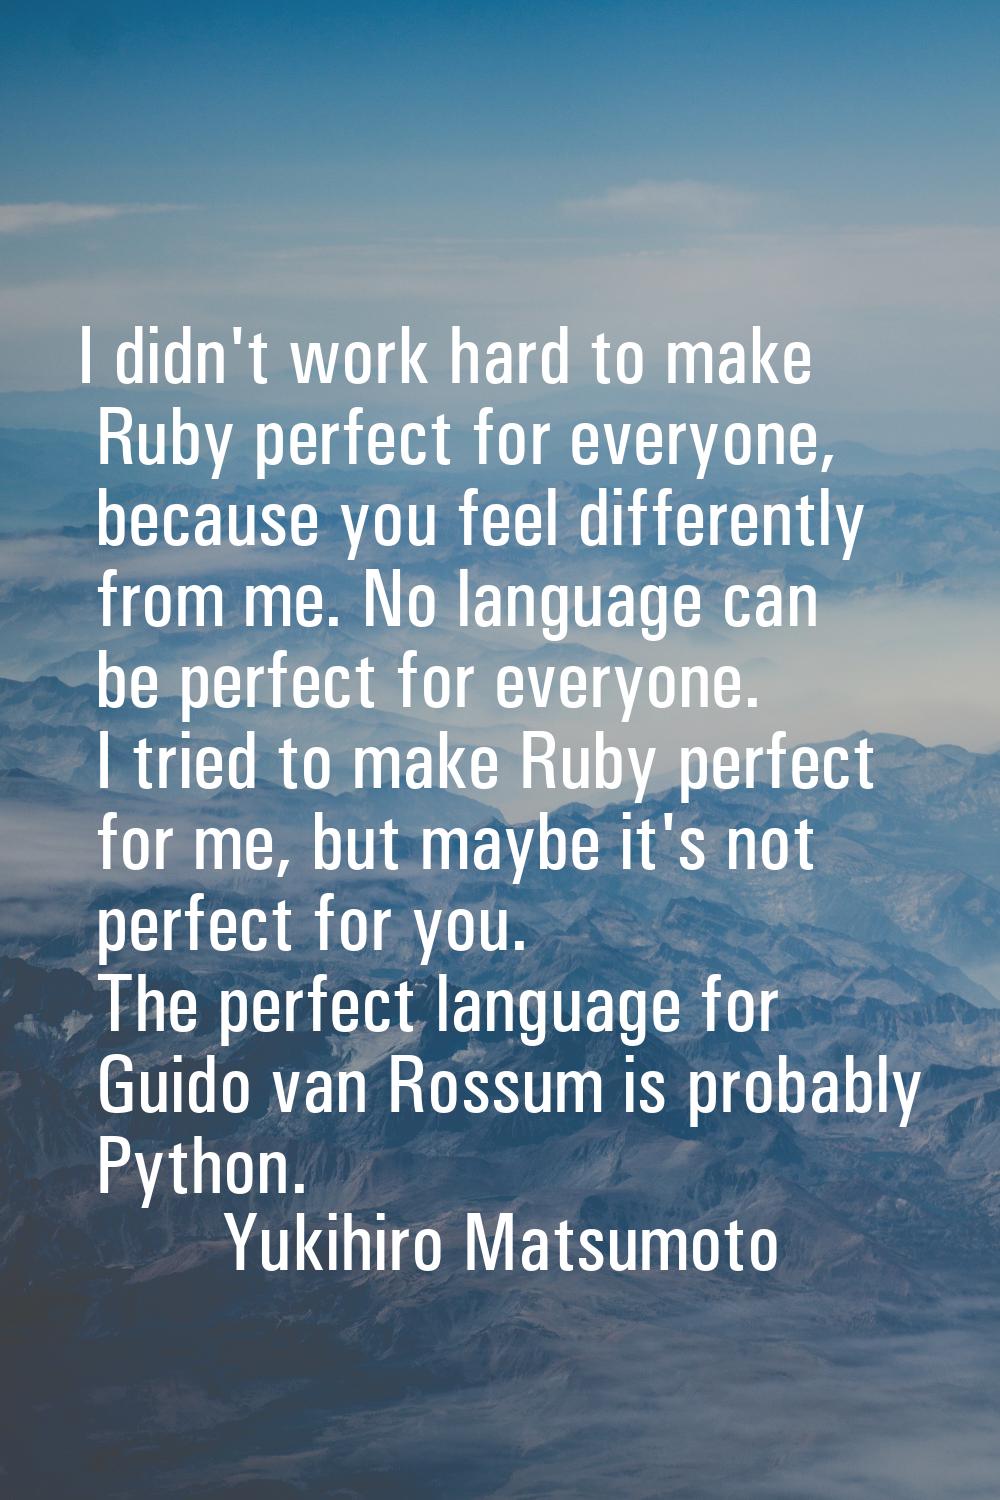 I didn't work hard to make Ruby perfect for everyone, because you feel differently from me. No lang